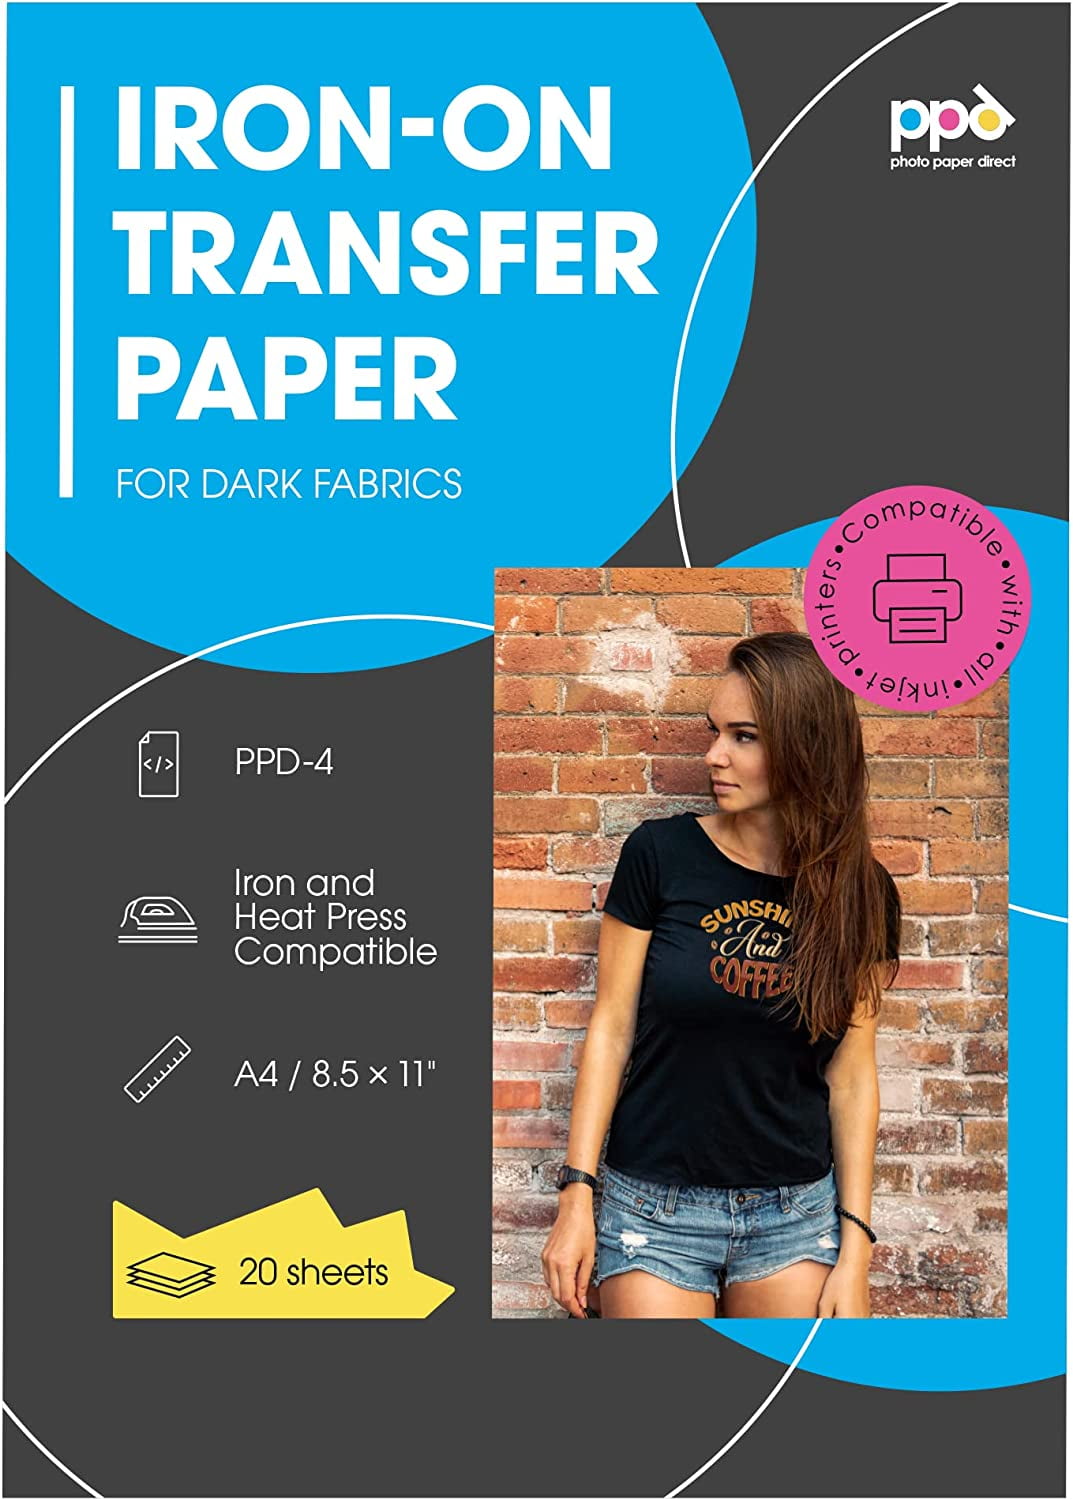 MECOLOUR Inkjet Iron On Heat Transfer Paper 20 Sheets for Dark Fabric  8.5x11”A4 for T-Shirt,Totes, Bags for Any Inkjet Printer, Long Lasting  Printing